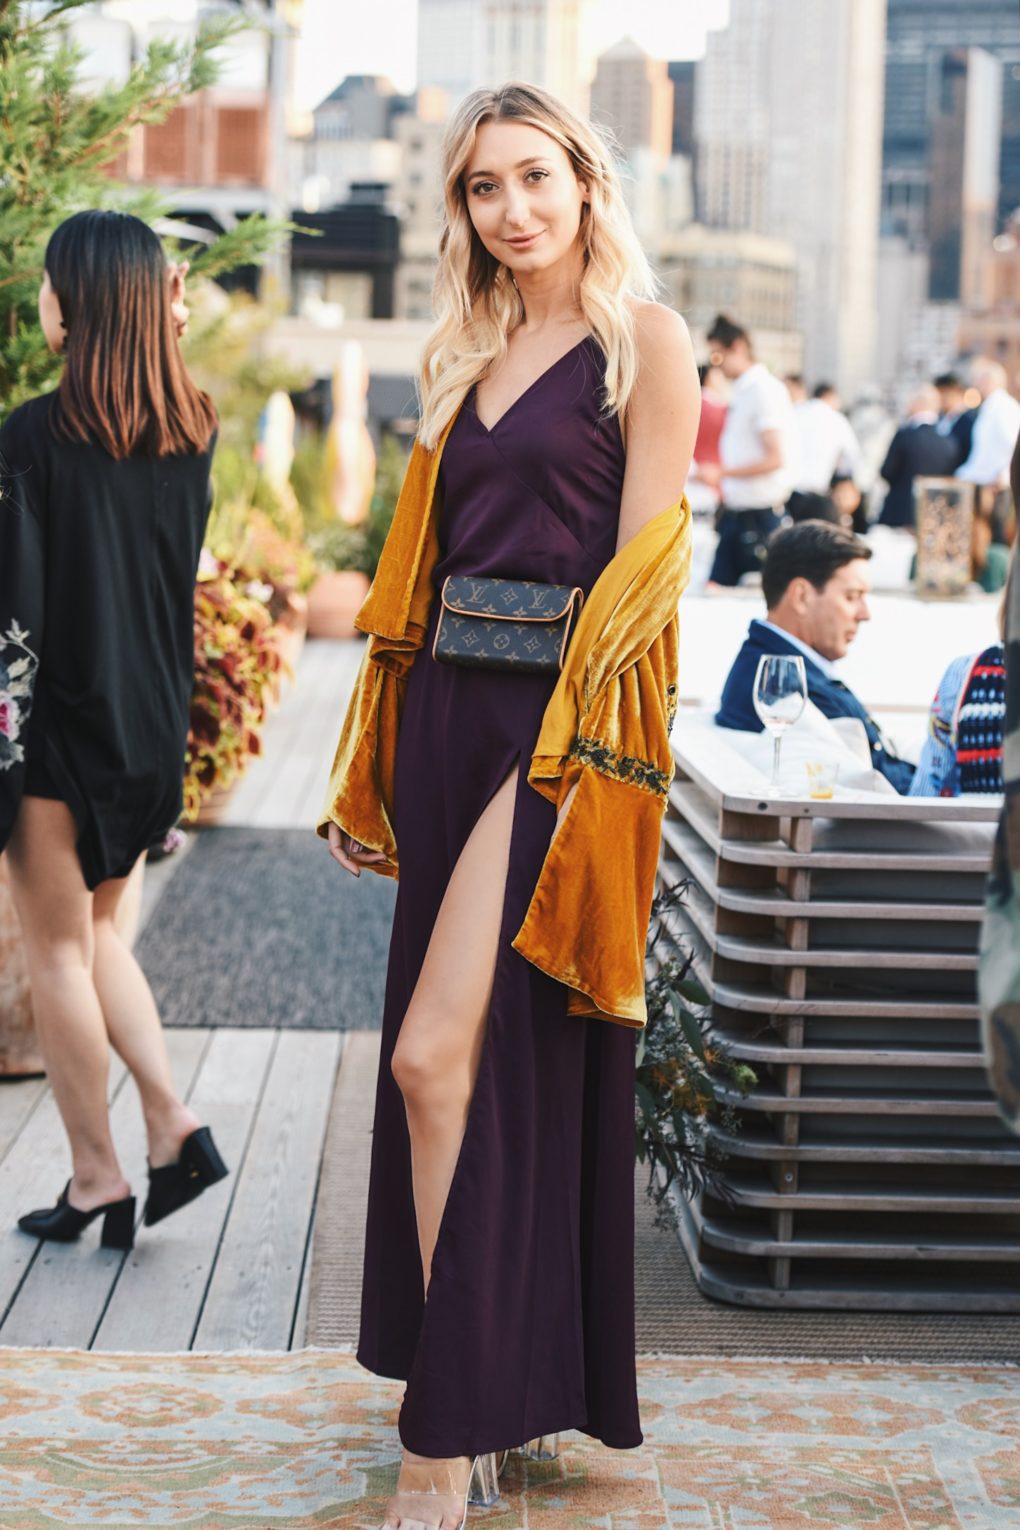 NYFW Vogue + Free People Rooftop Party #FPCOATCHECK